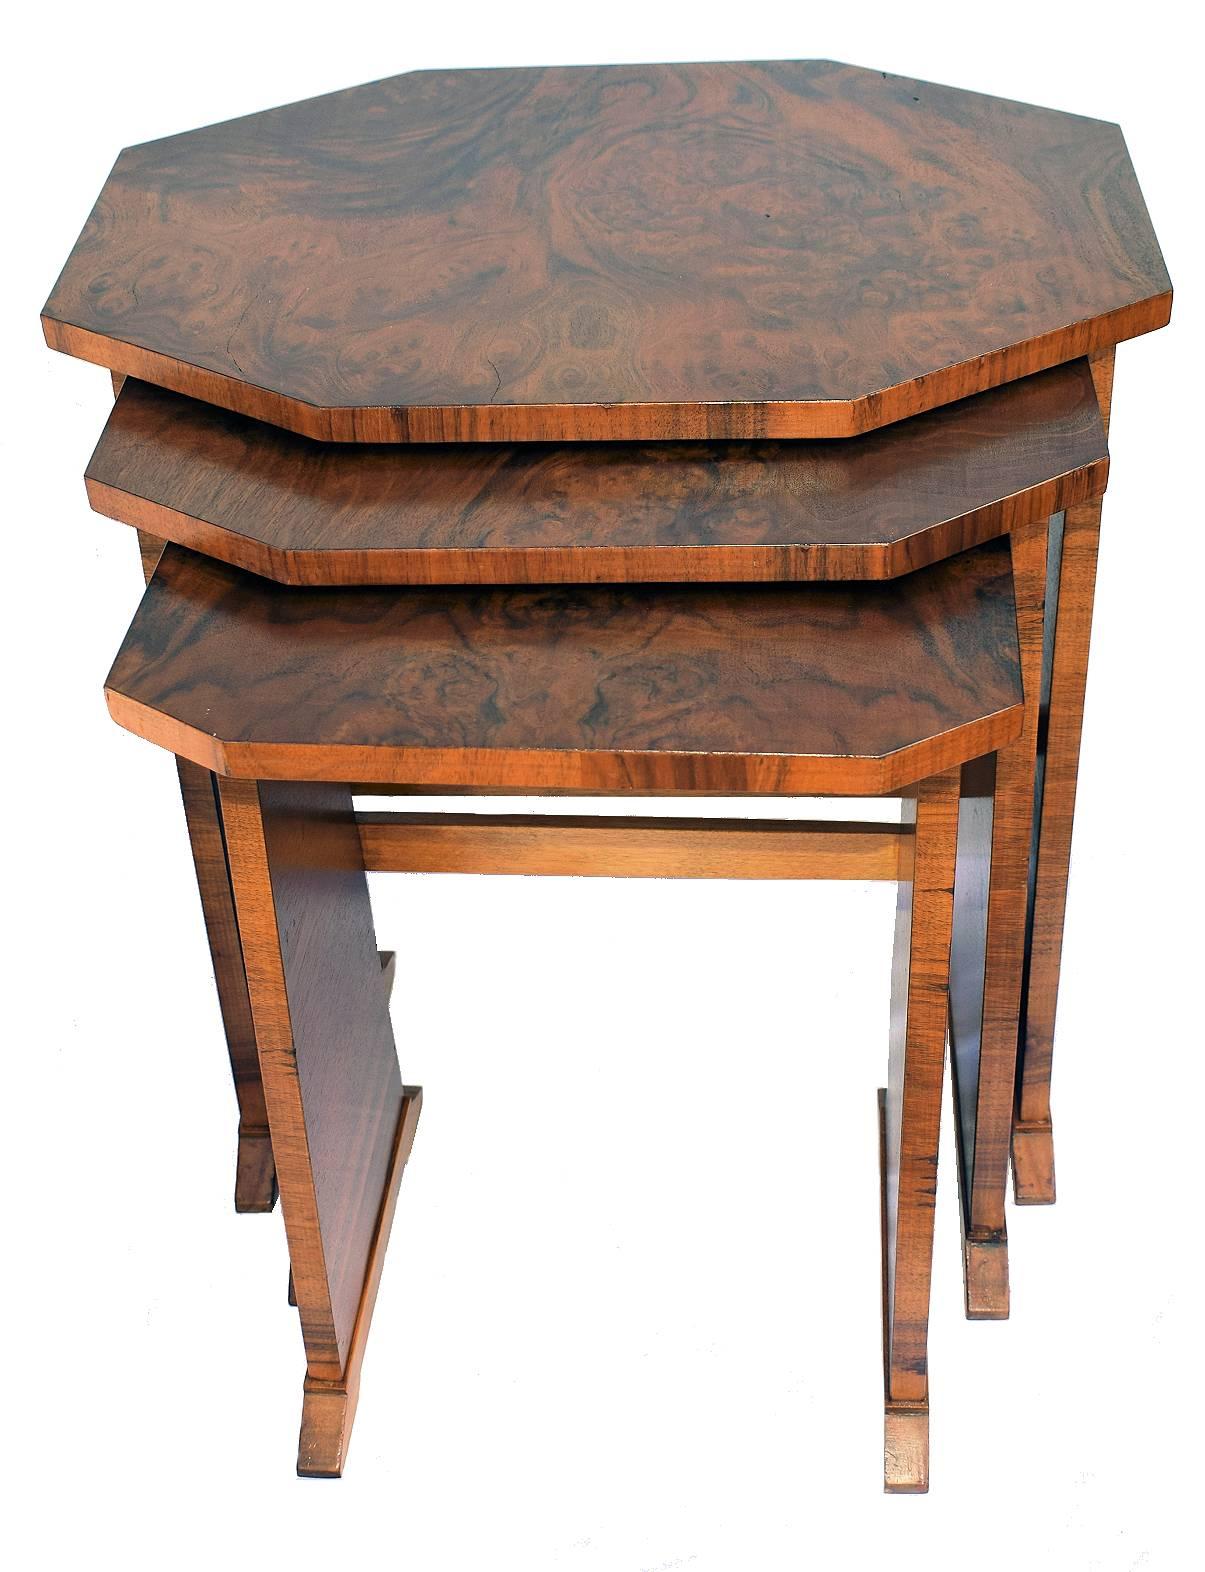 A stylish 1930s Art Deco nest of tables. One large with two under tier inserts with the most exquisite warm walnut veneers. A rare classic set to enhance your home interior. In excellent condition. having been recently and professionally restored.